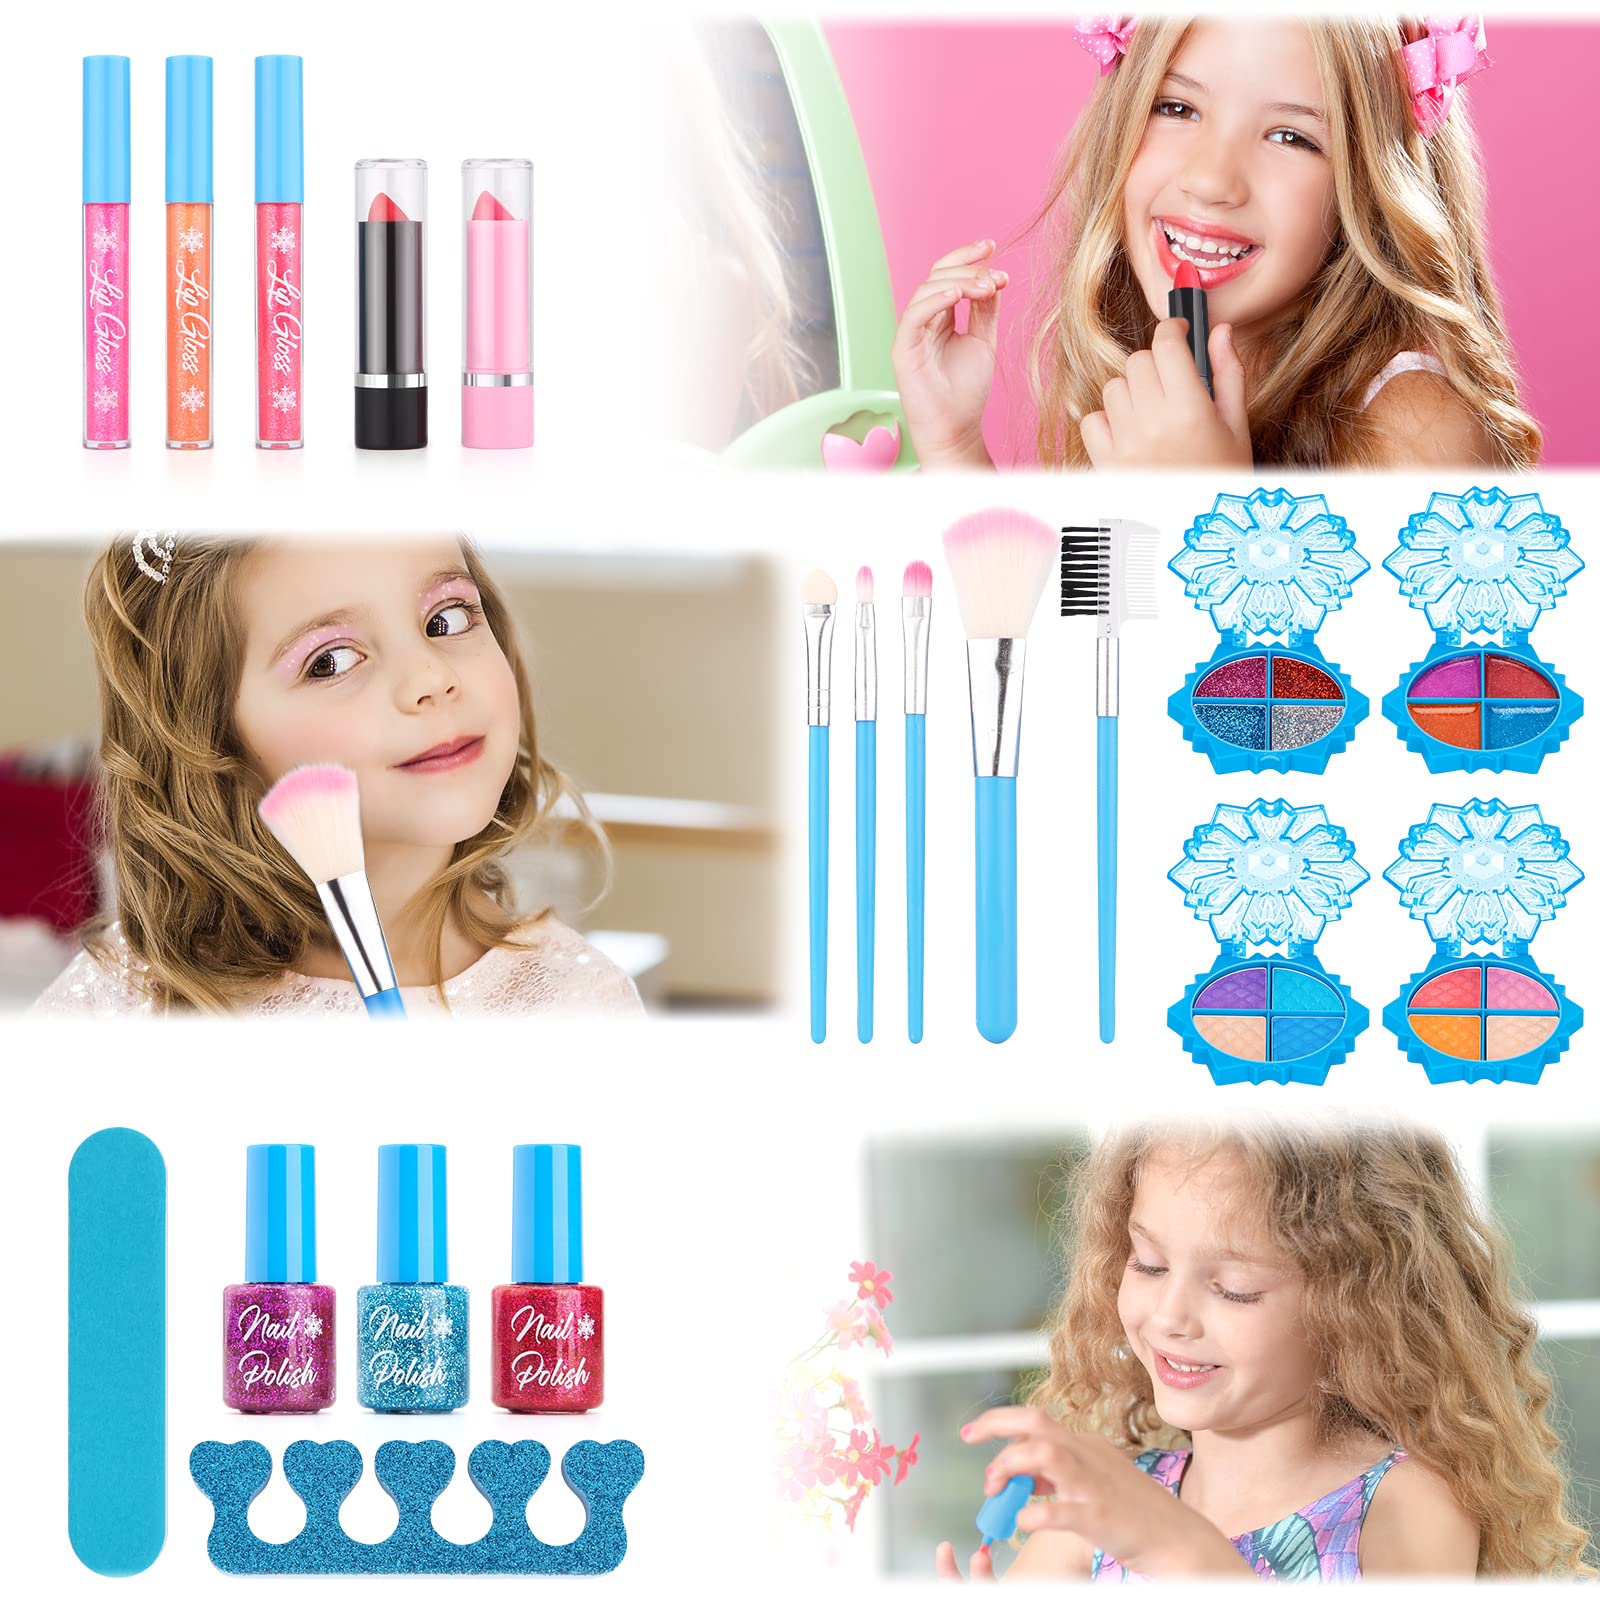 Kids Makeup Kit for Girls, Washable Makeup Kit For Little Girls Princess Real Cosmetic Beauty Set, Gifts for Toddles Girl Pretend Play, Frozen Makeup Set for Girls Toys for 3 4 5 6 7 8 Years Old Girls